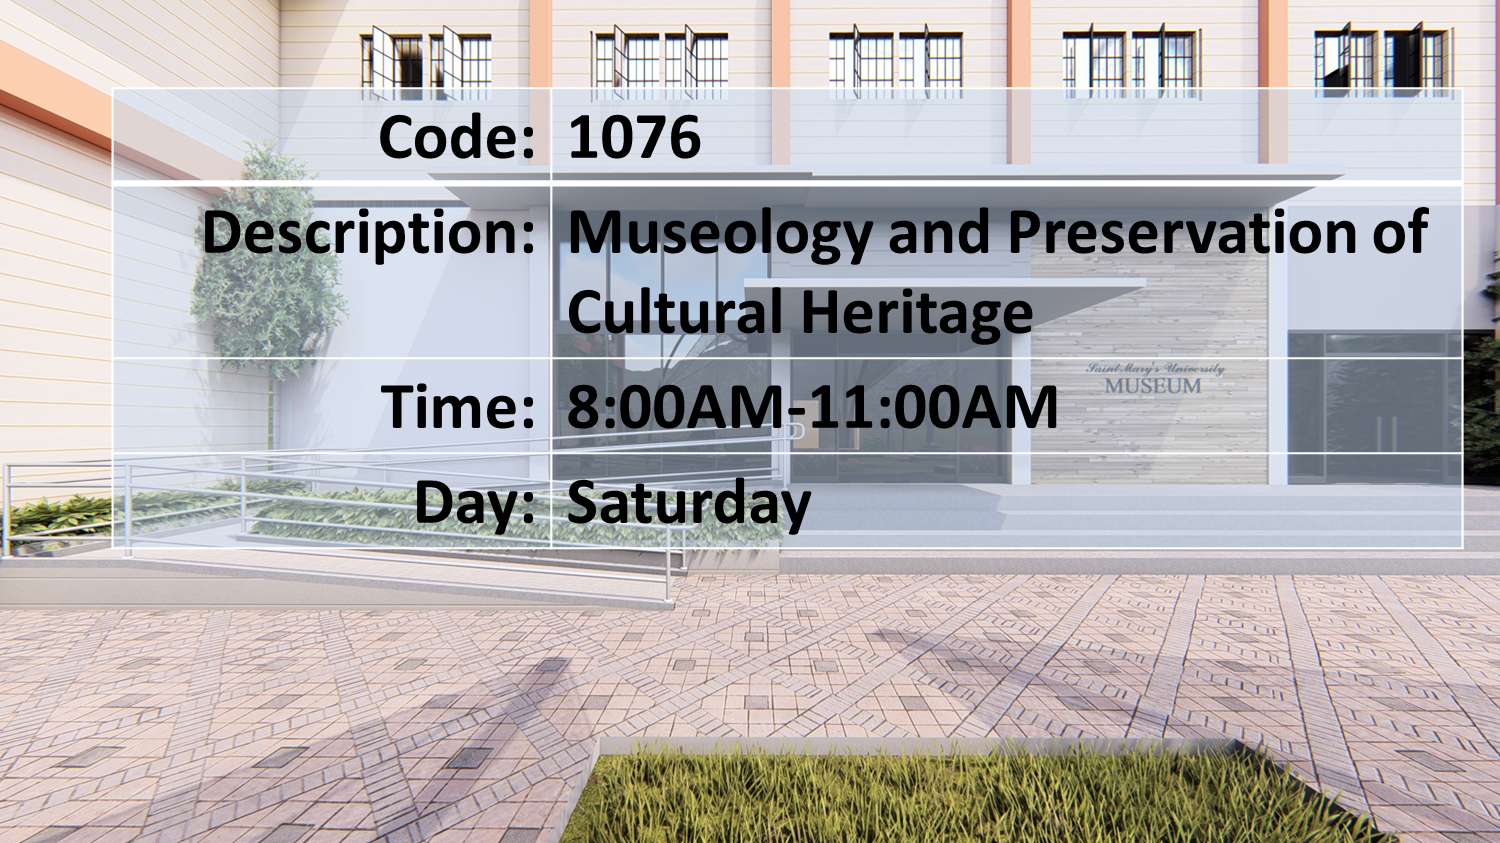 Museology and Preservation of Cultural Heritage Resources